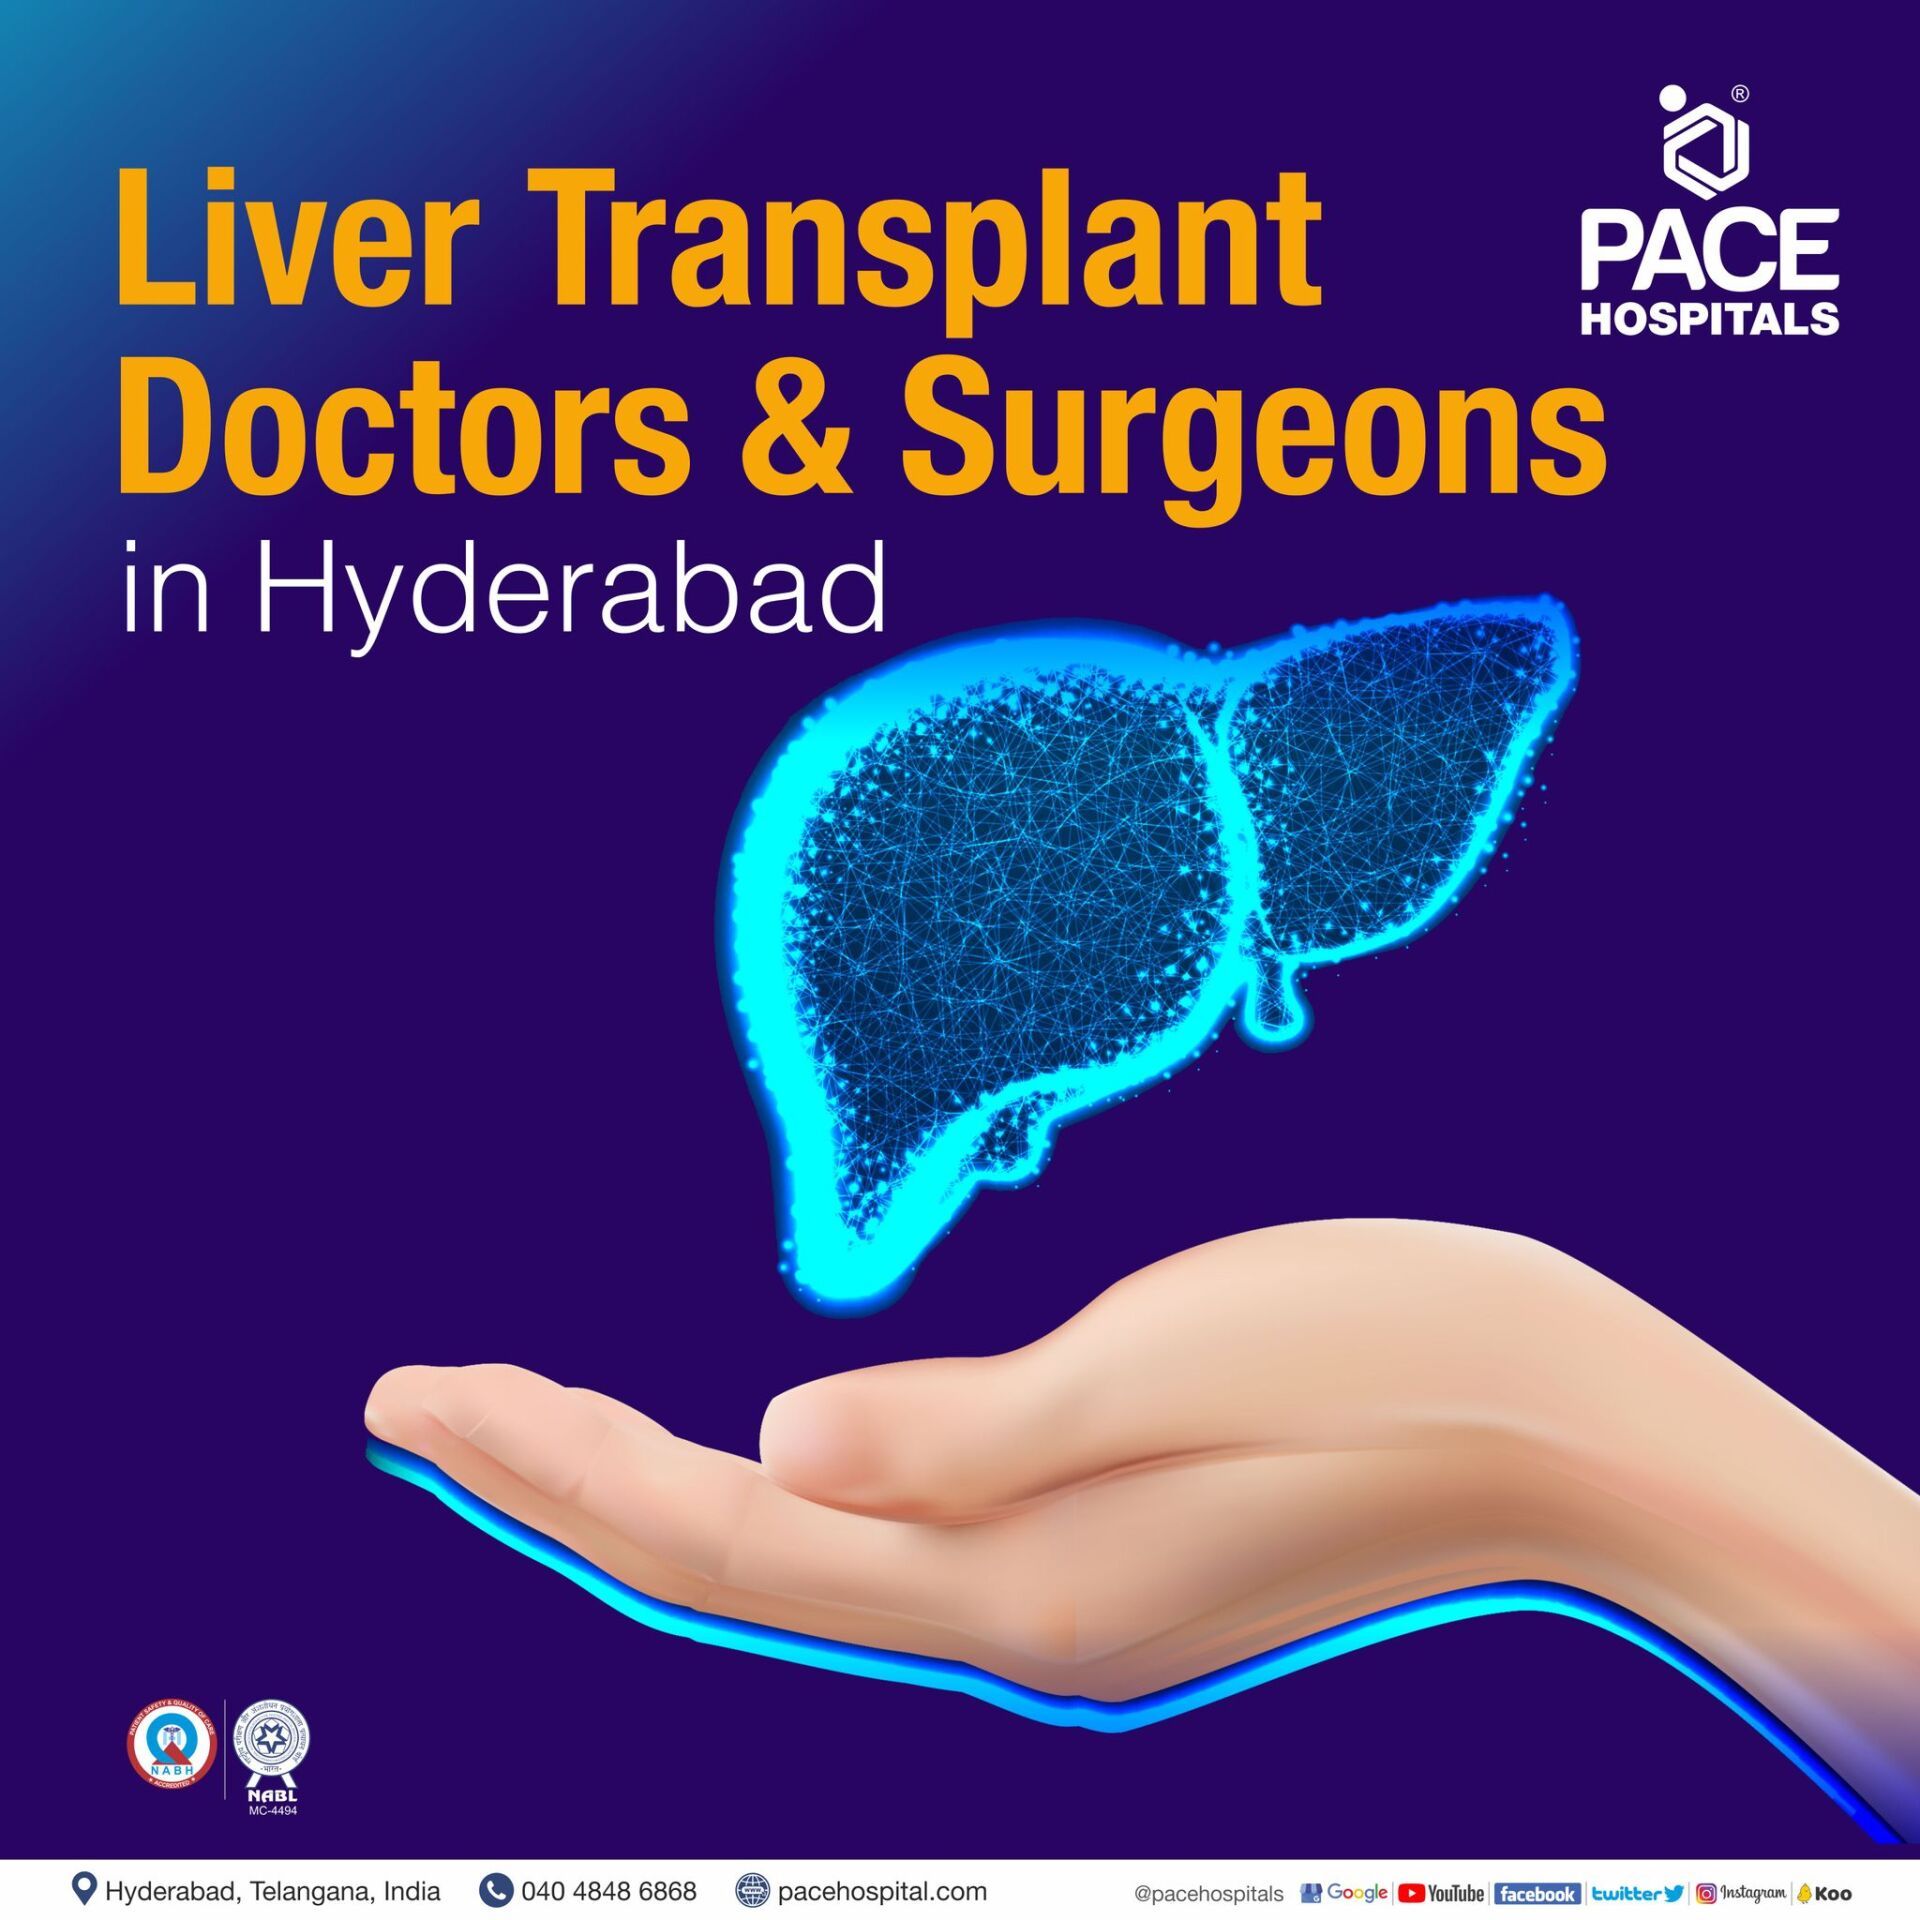 best doctor for liver transplant in India | top liver transplant doctors in hyderabad | liver transplant surgeons | liver transplant specialist near me